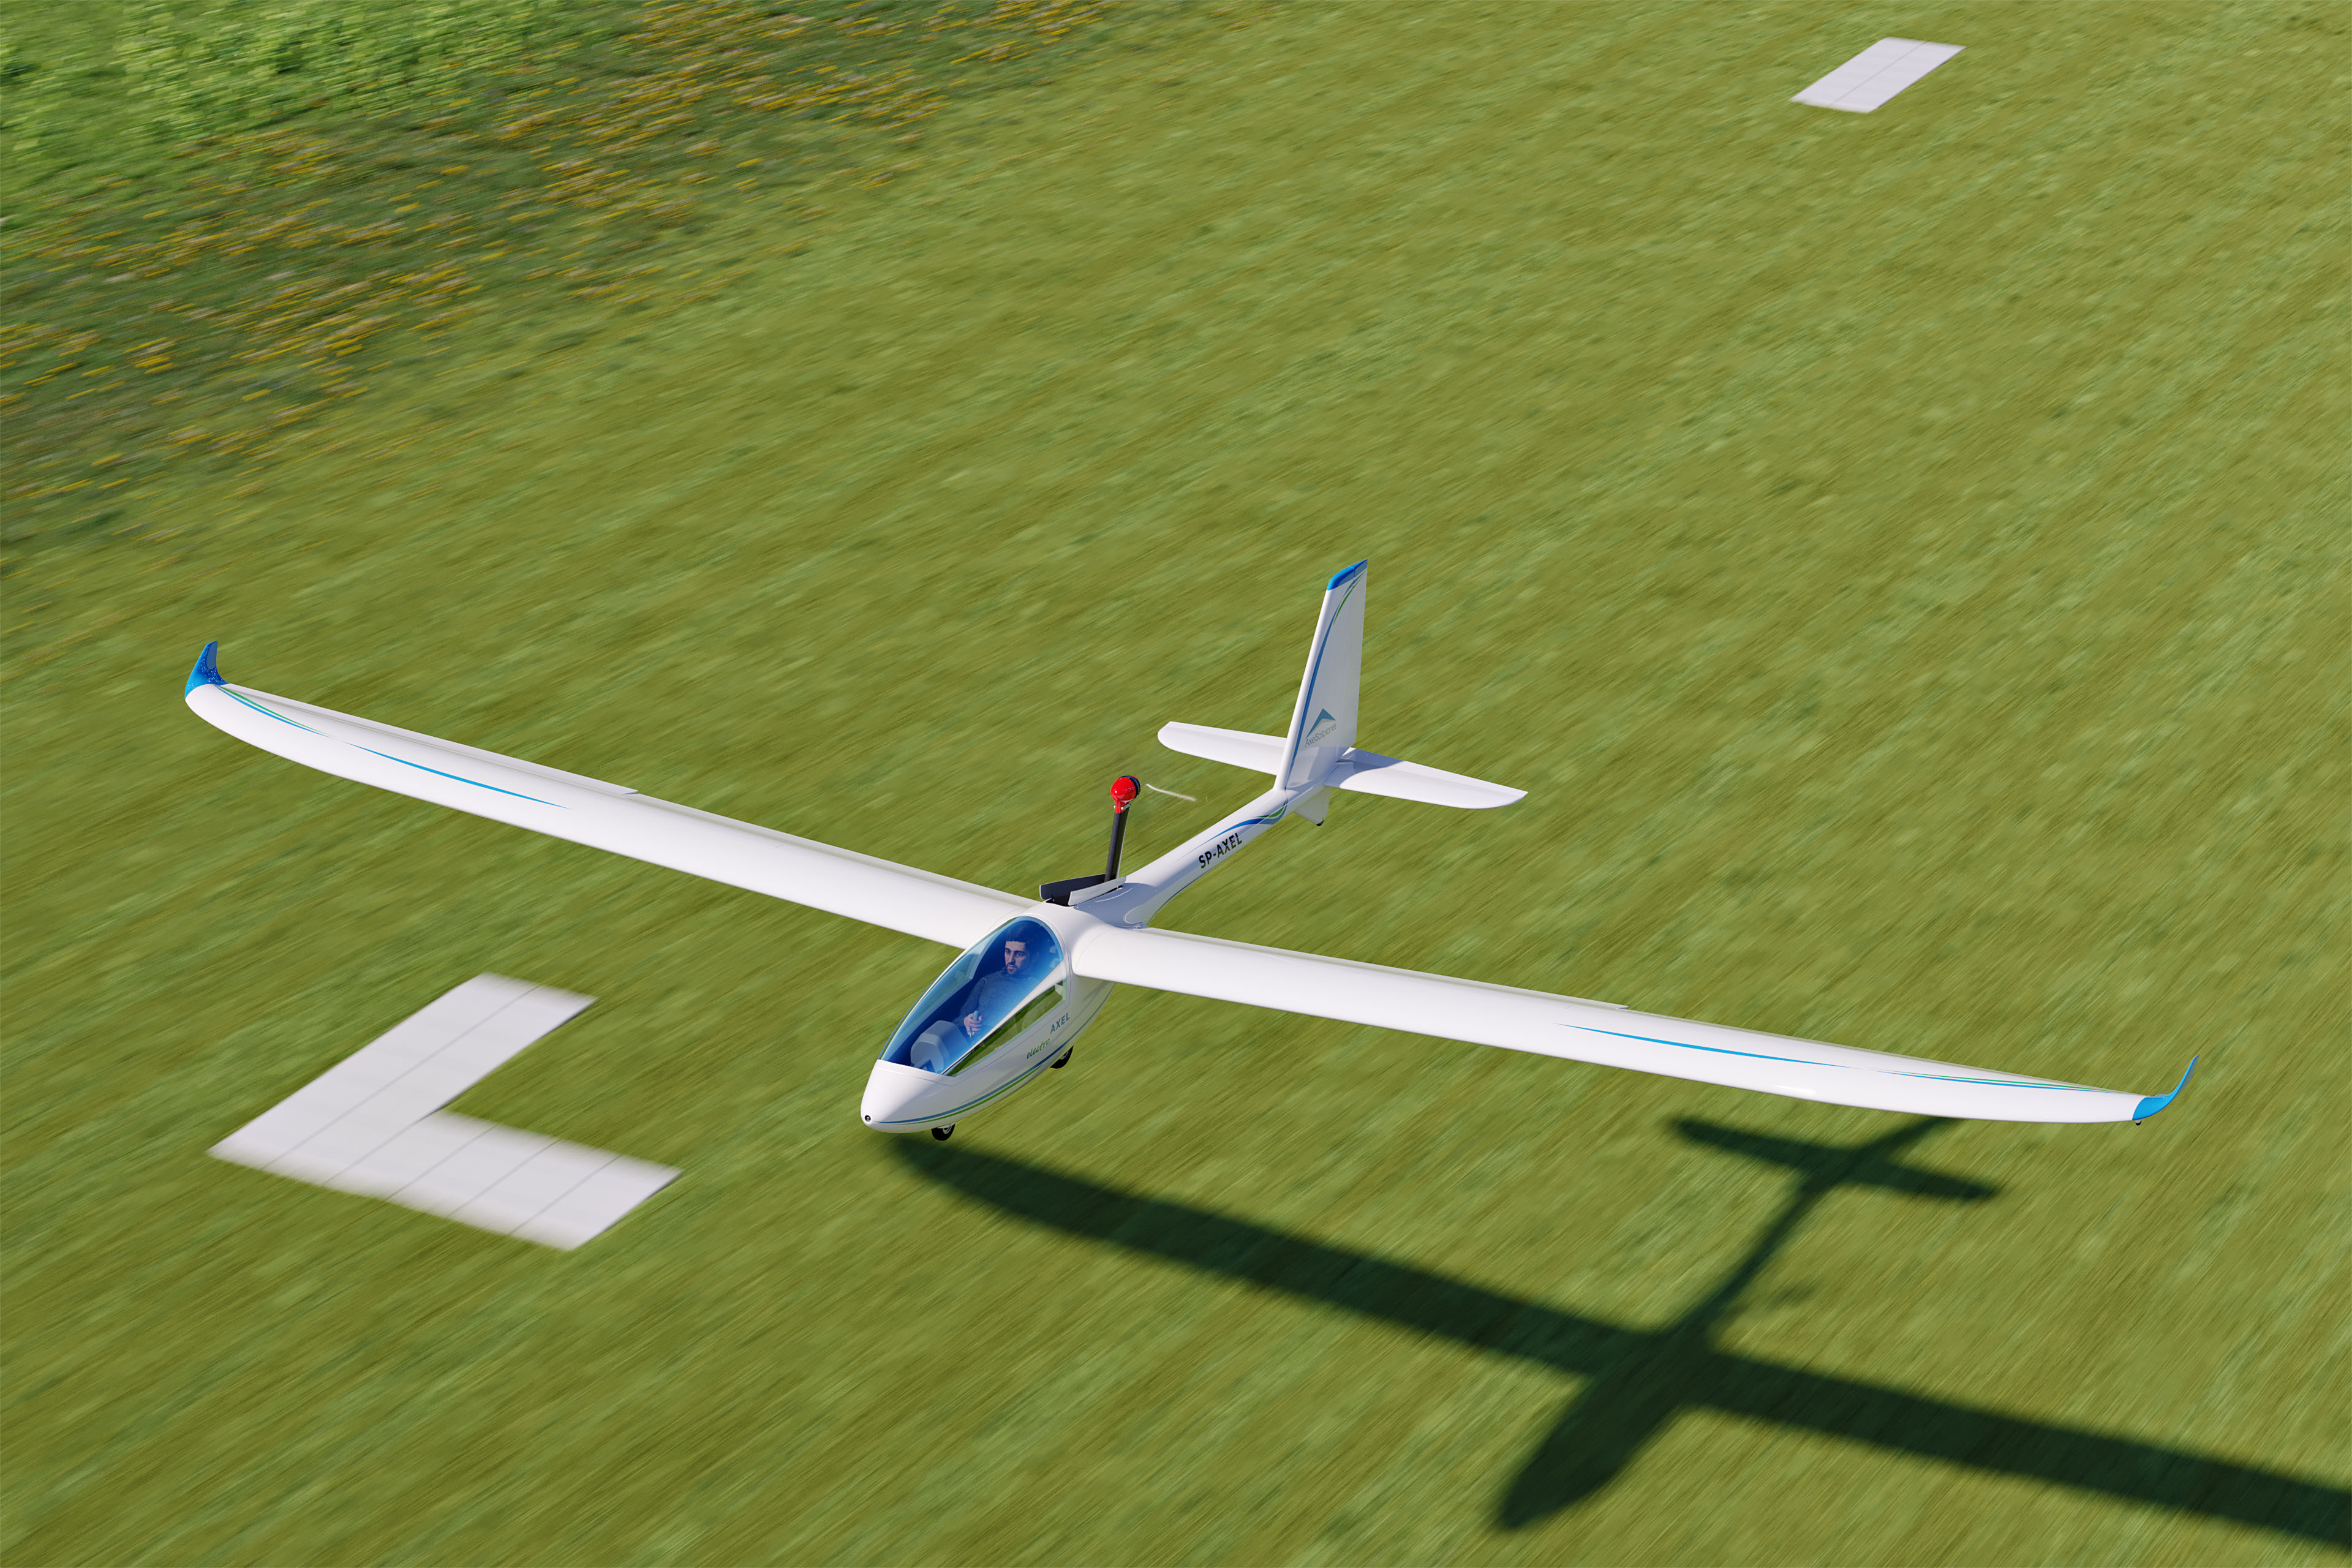 AXEL Glider take off on end of the grass runway.